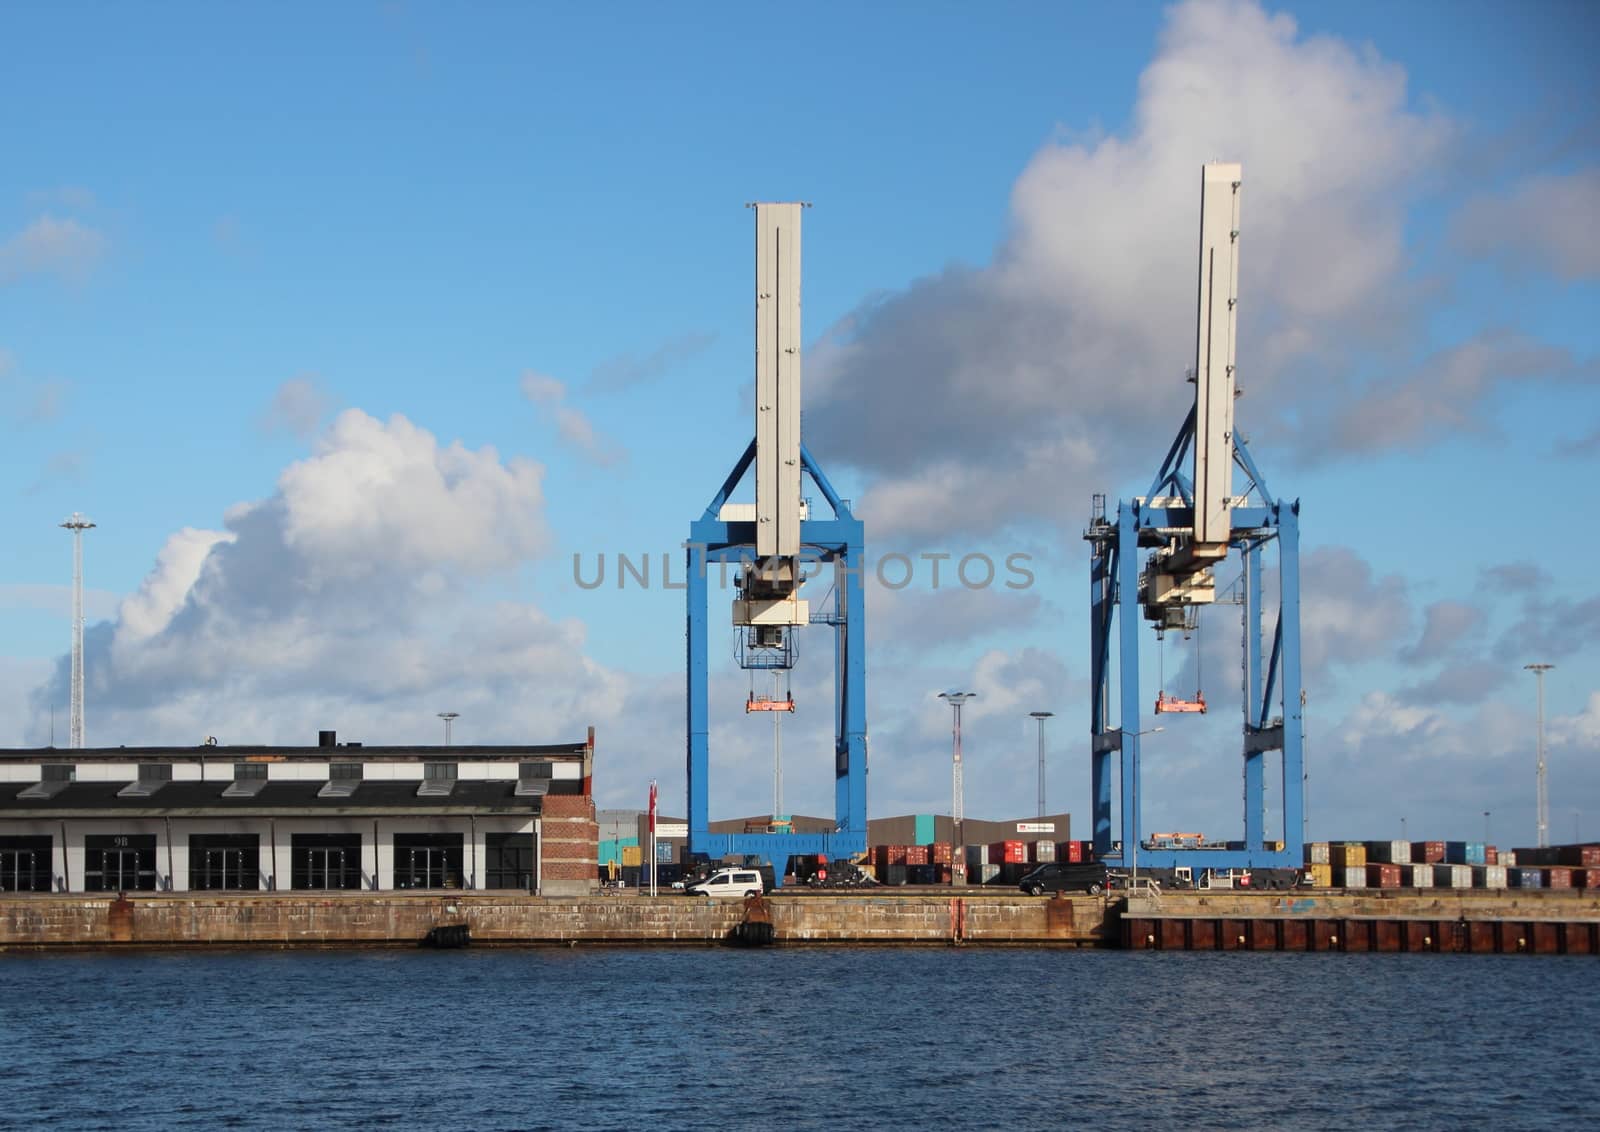 Container Industrial Cranes at Harbor Pier with Blue Water Front